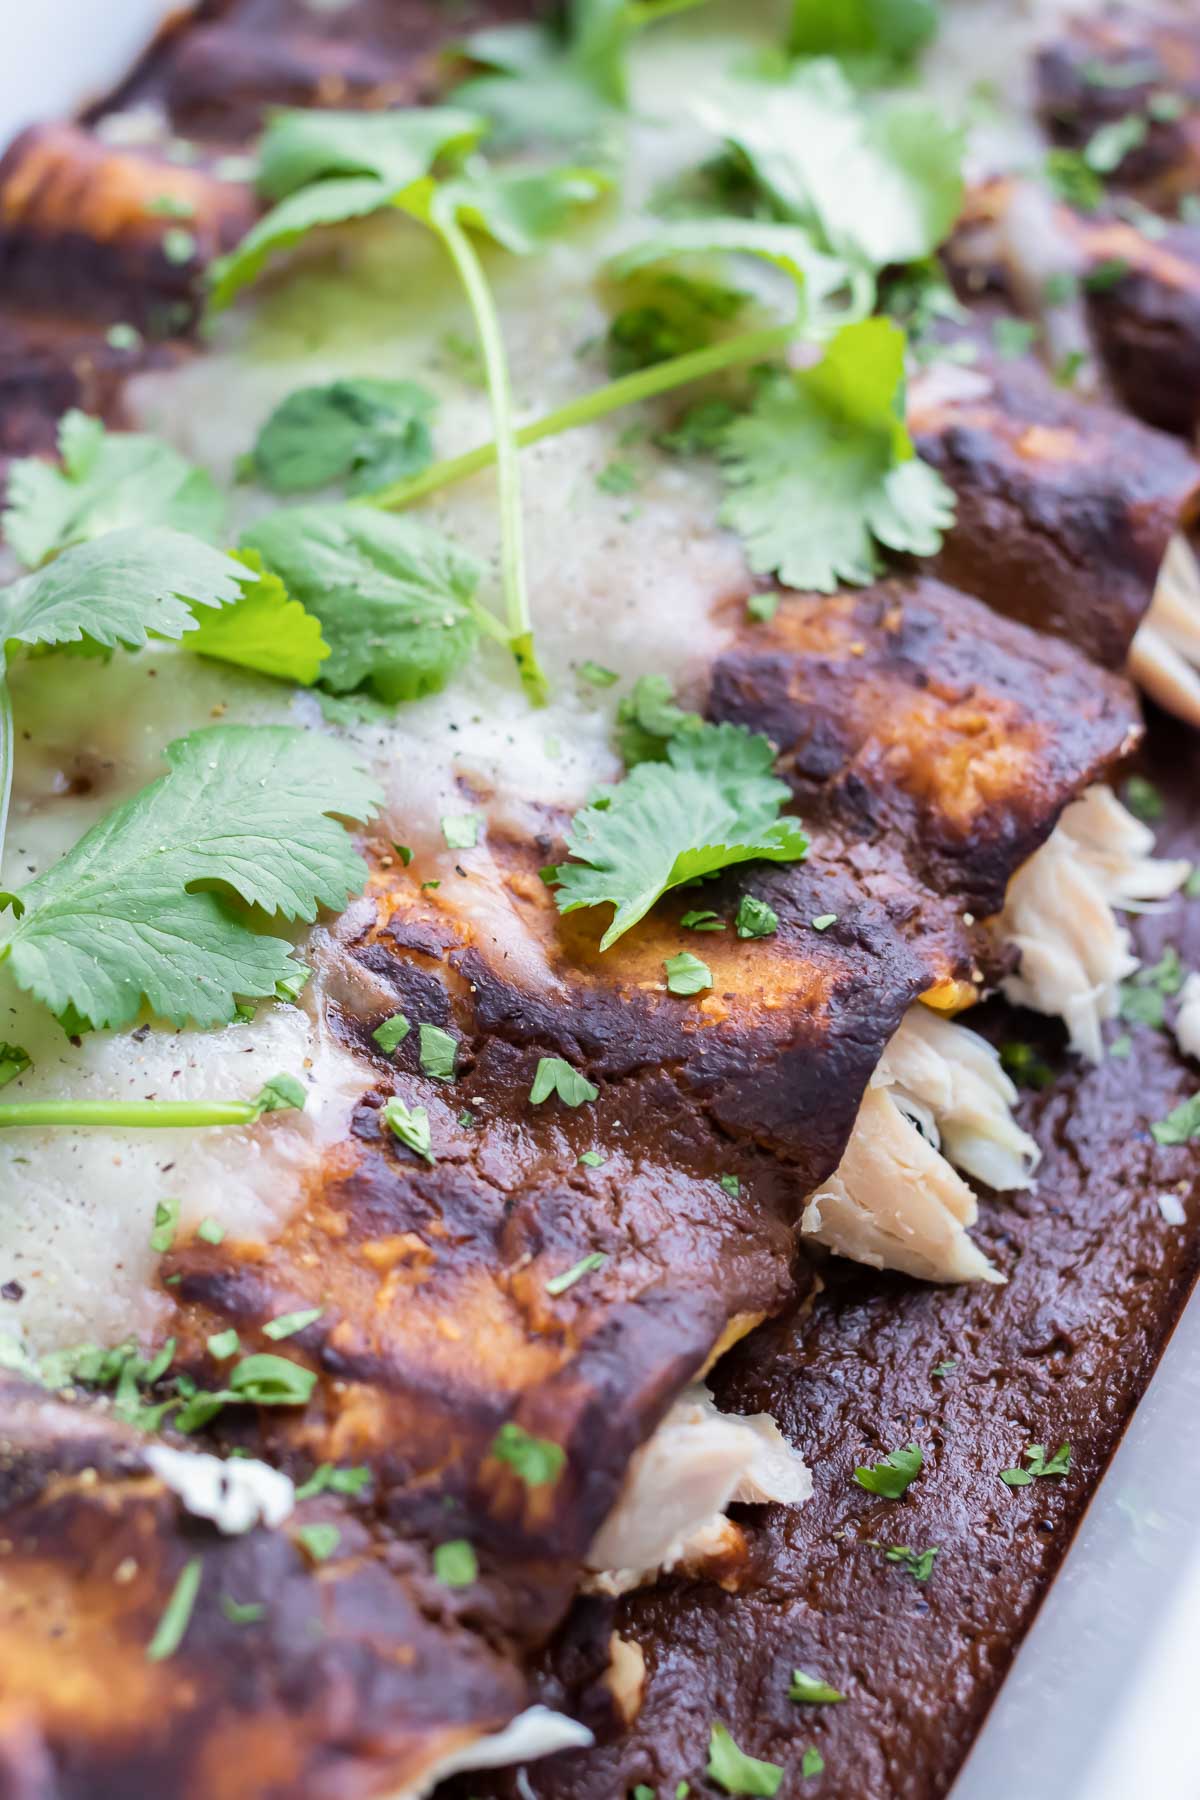 A row of chicken mole enchiladas is shown topped with fresh cilantro.